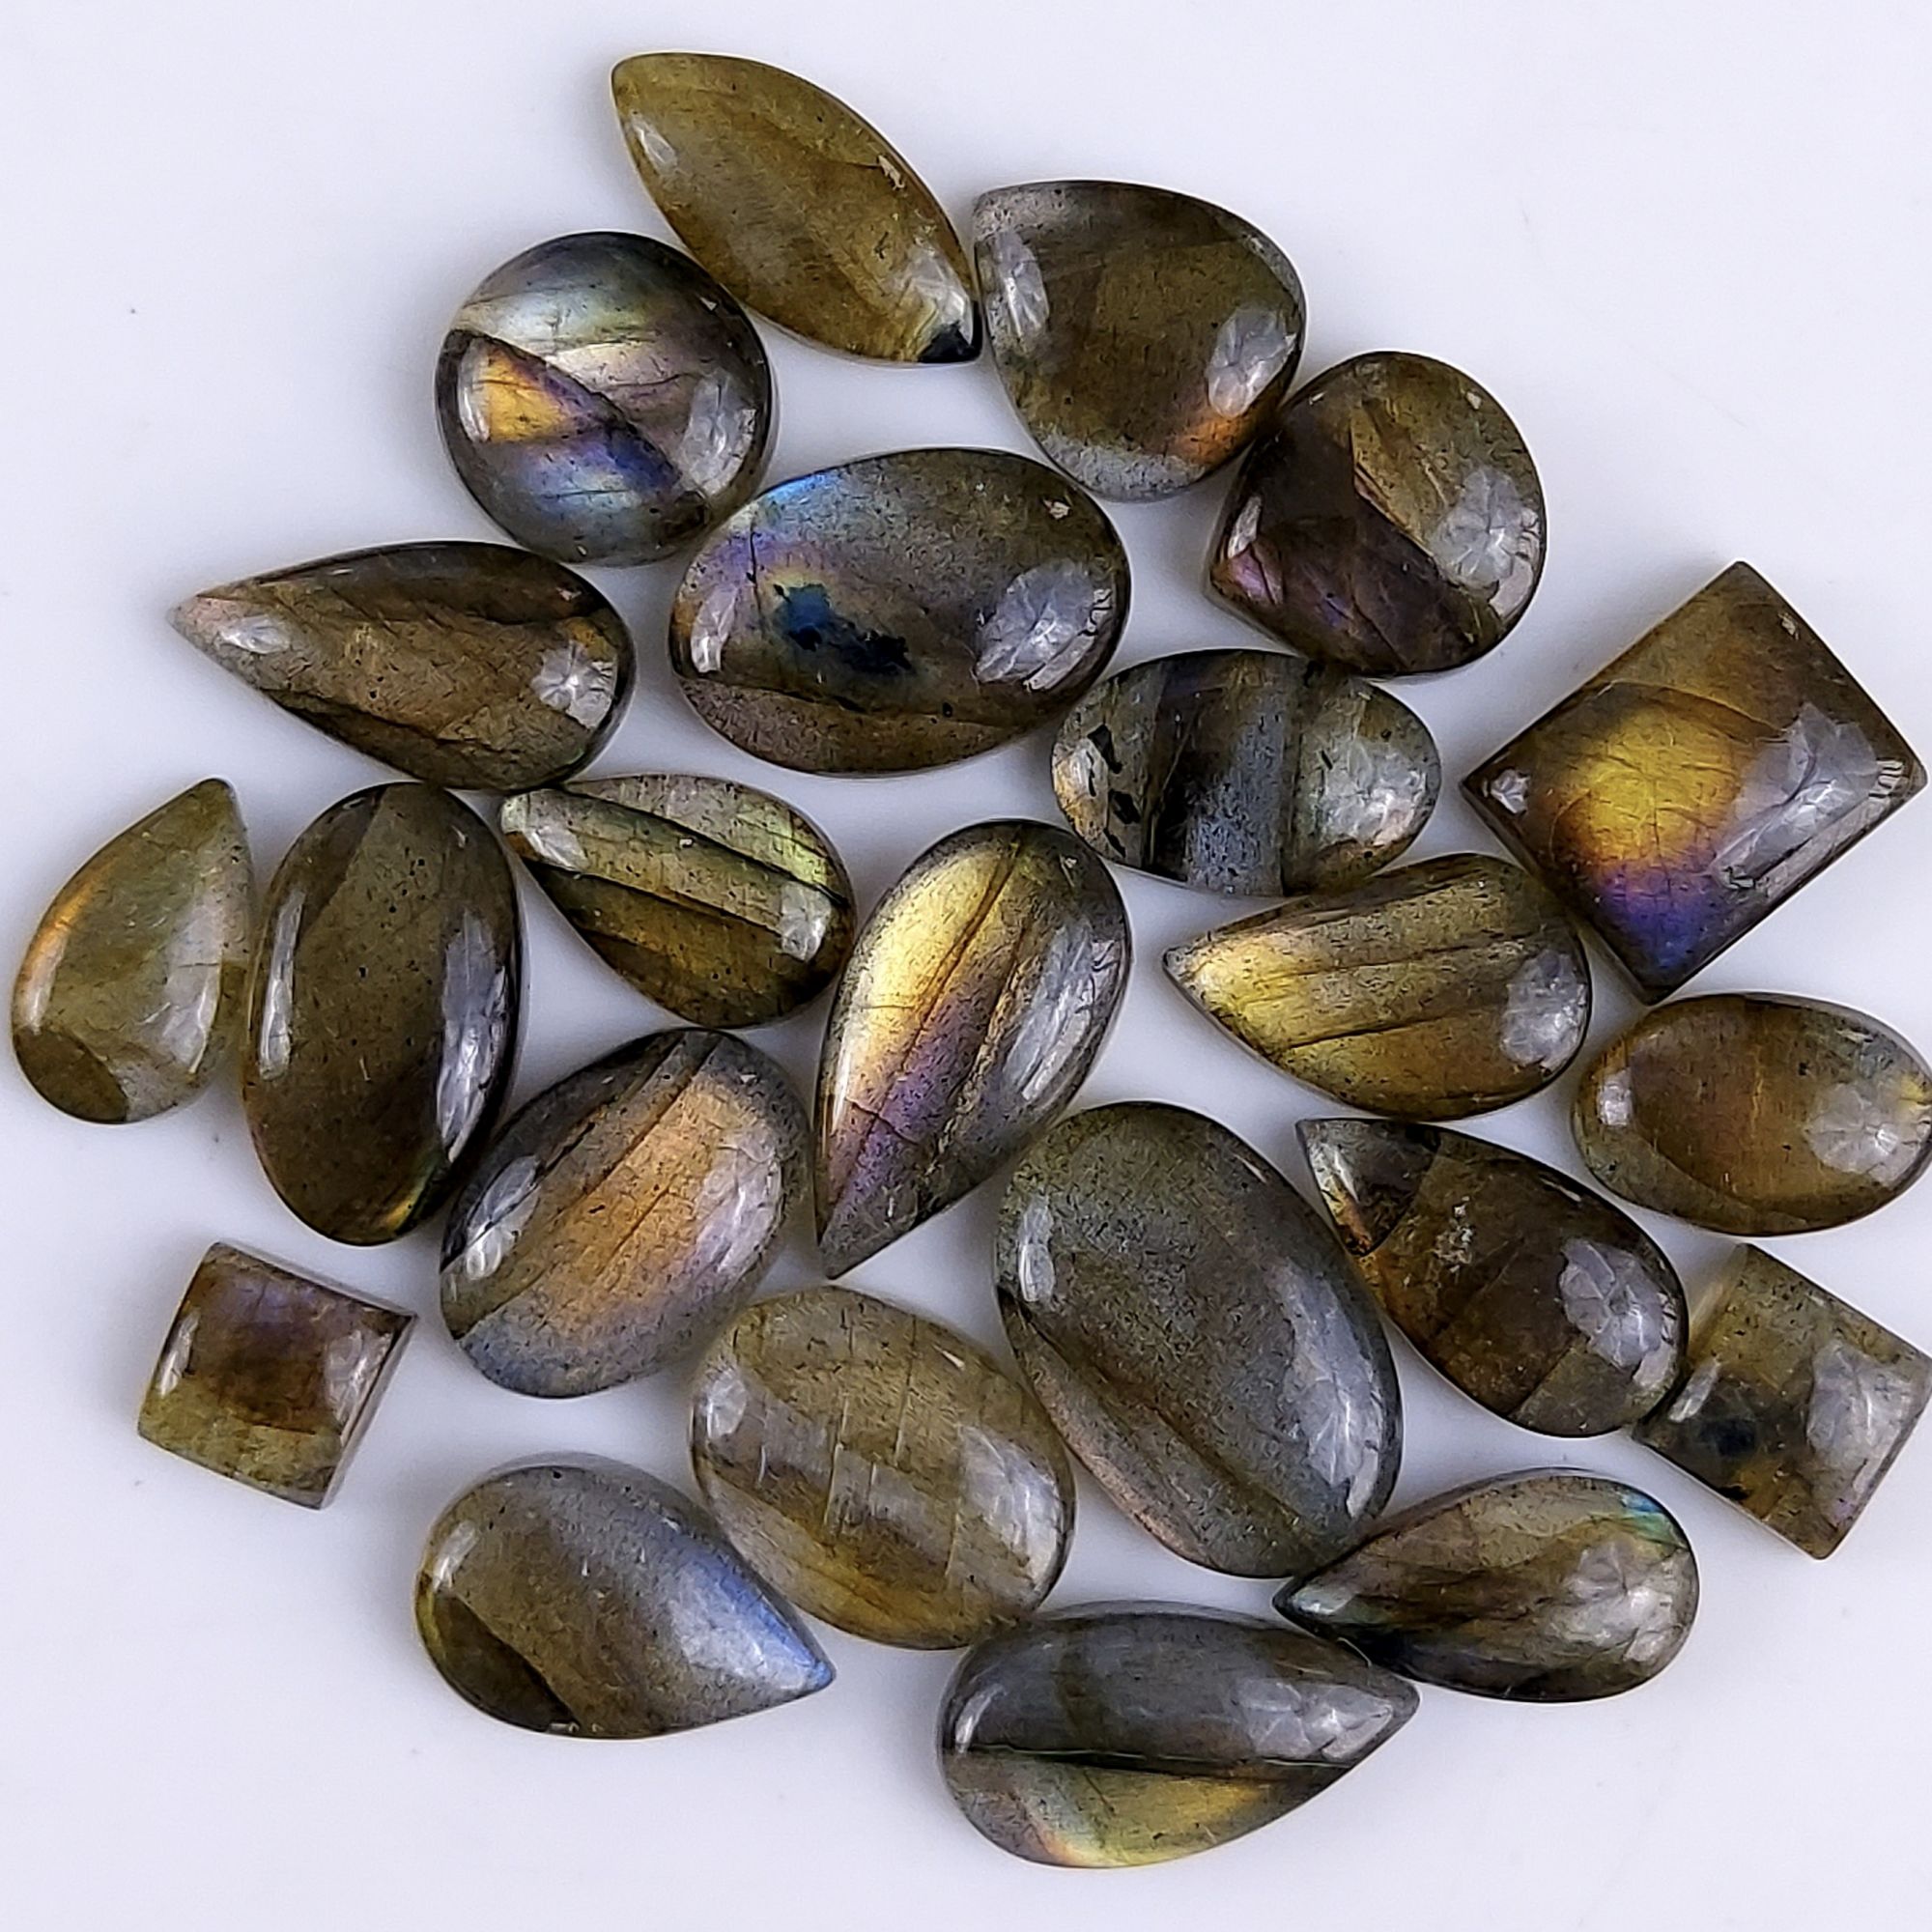 23Pcs 88Cts Natural Purple Fire Labradorite Cabochon Loose Gemstone Lot For Jewelry Making 15x10 6x6mm #8642